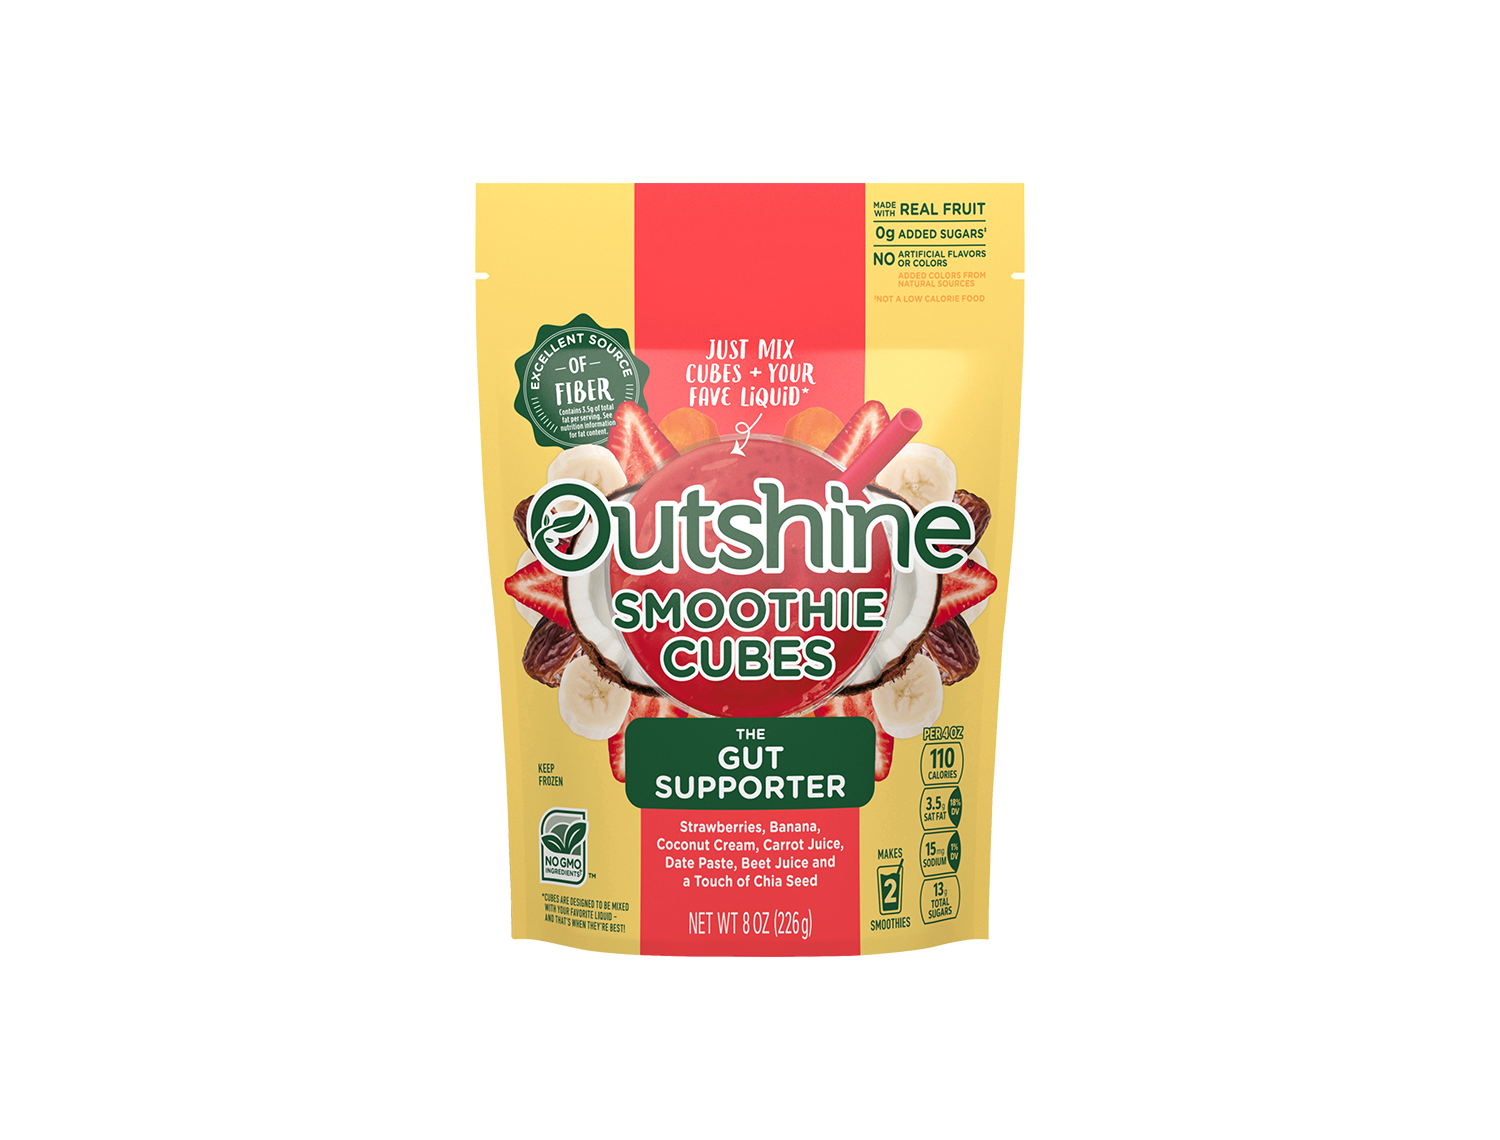 outshine smoothie cubes